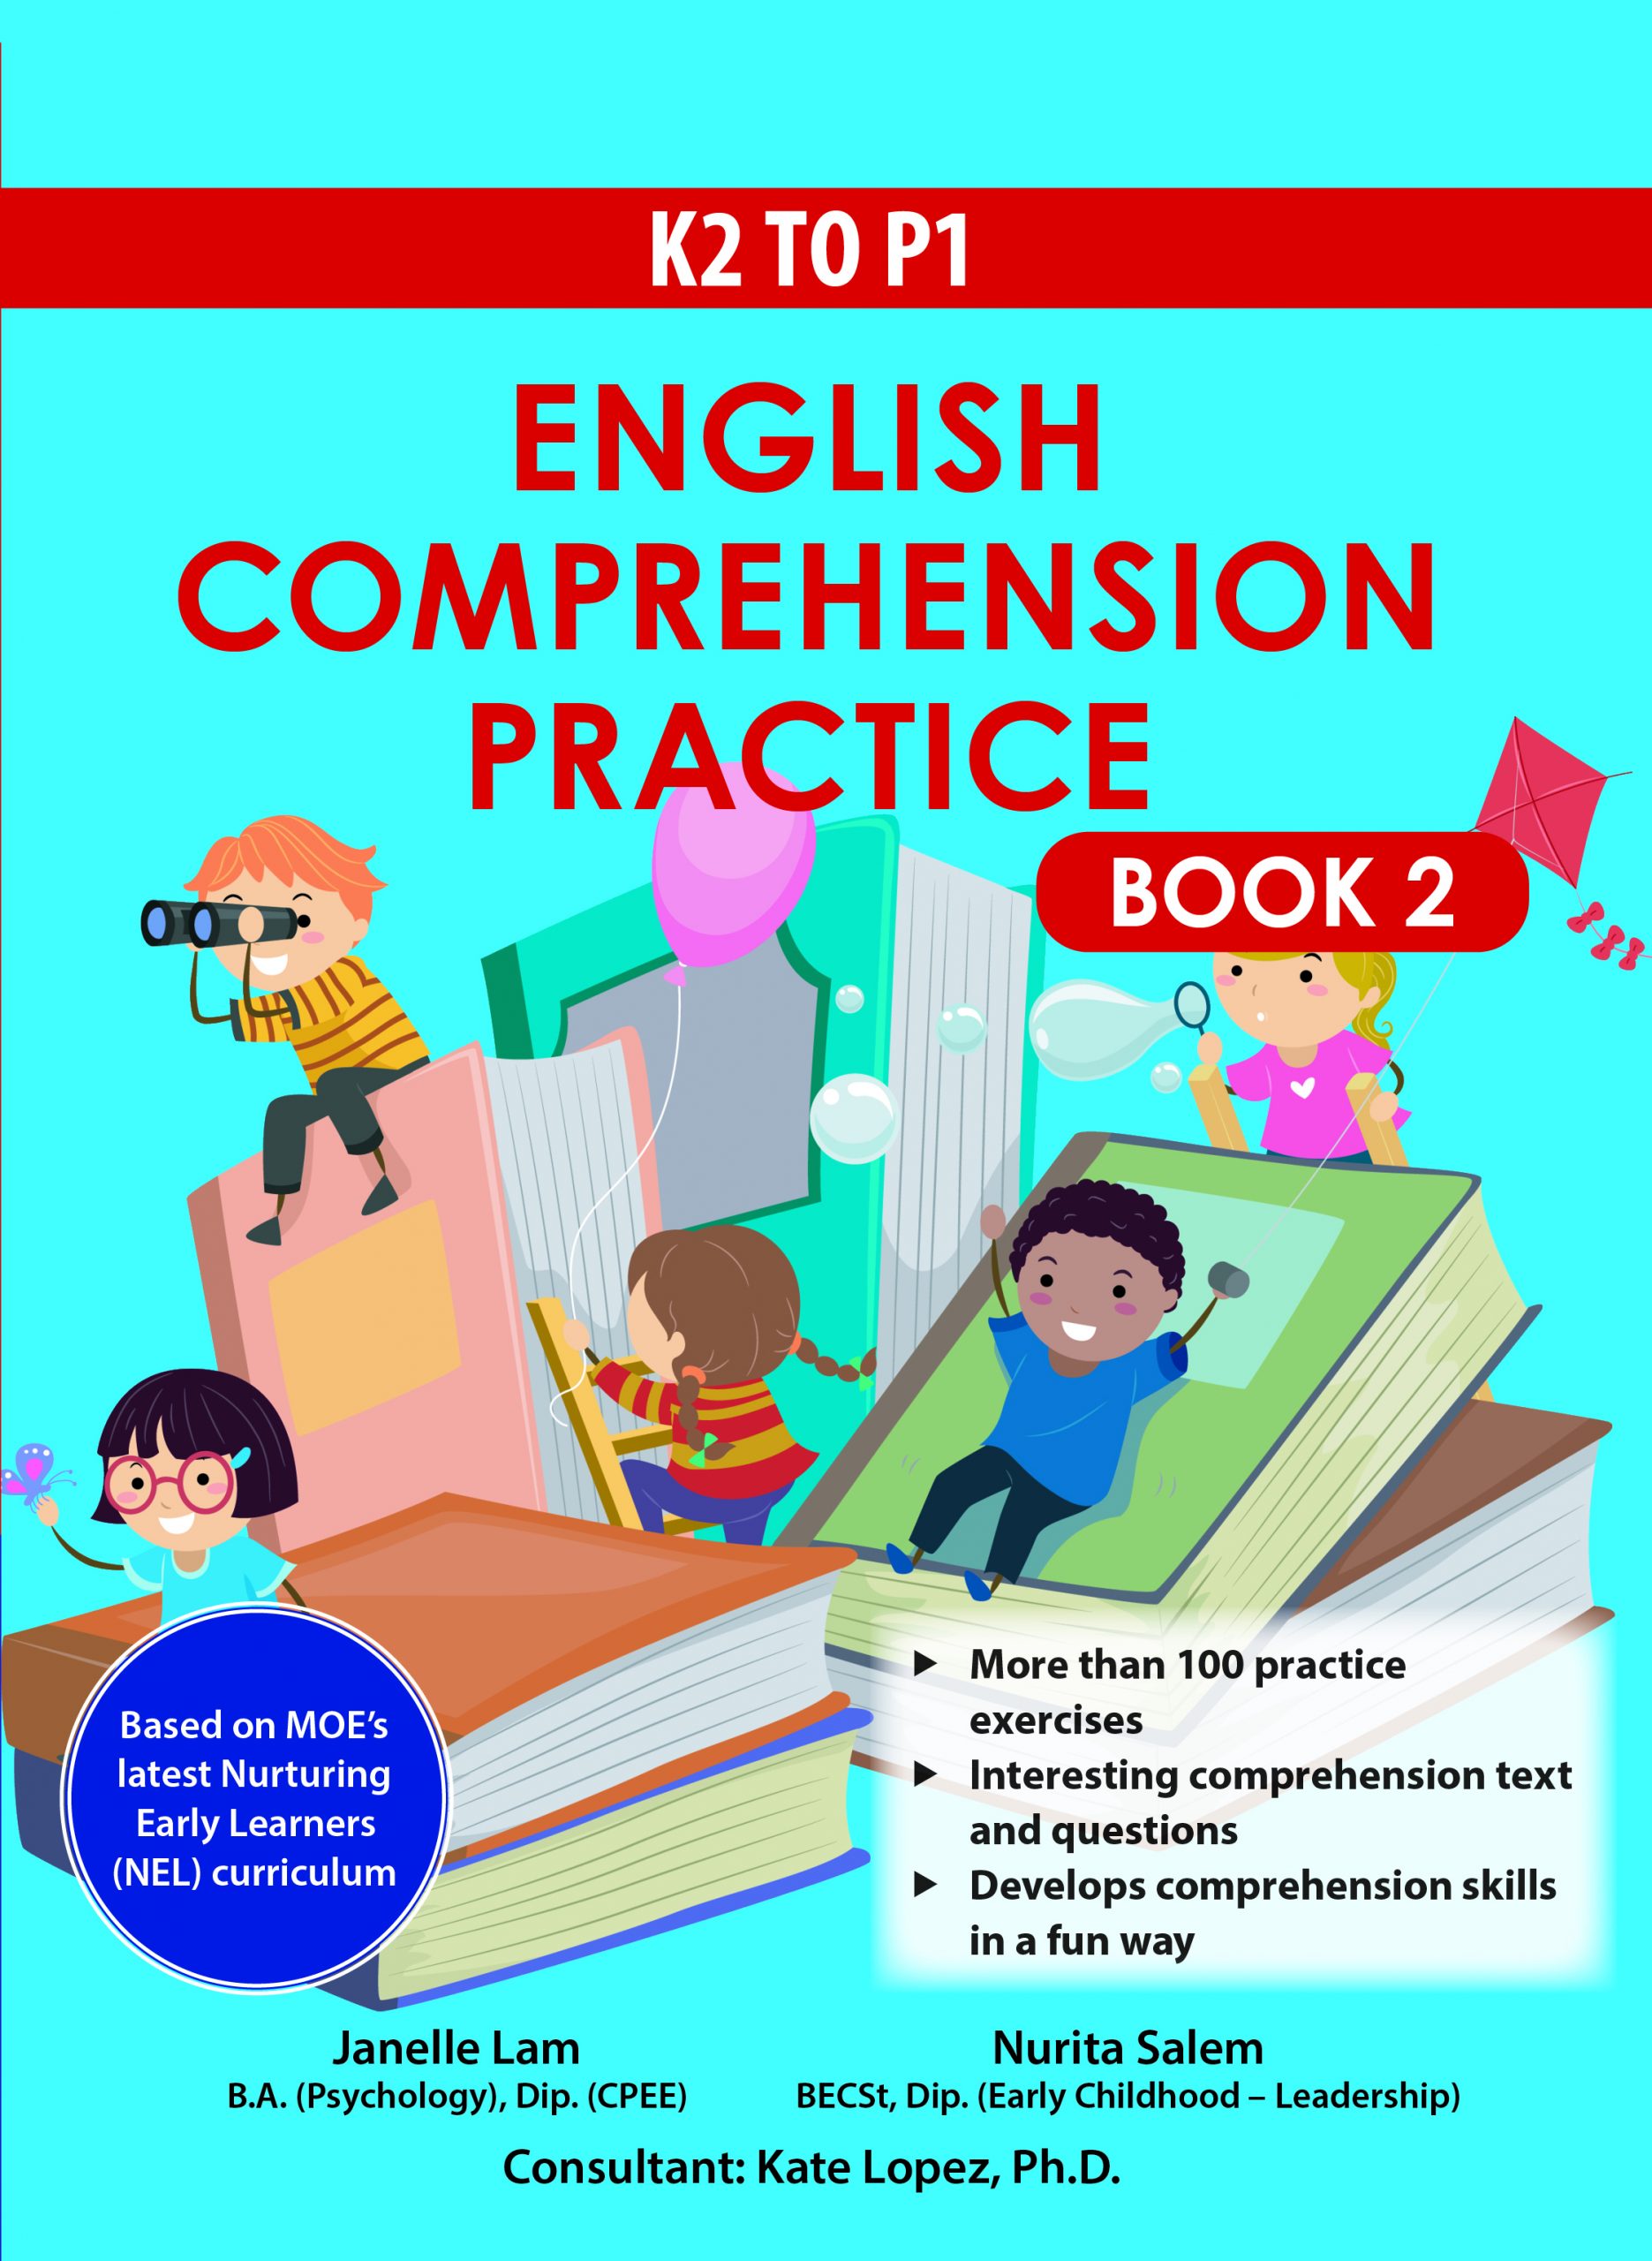 K2 To P1 English Comprehension Practice Book 2 CPD Singapore Education Services Pte Ltd